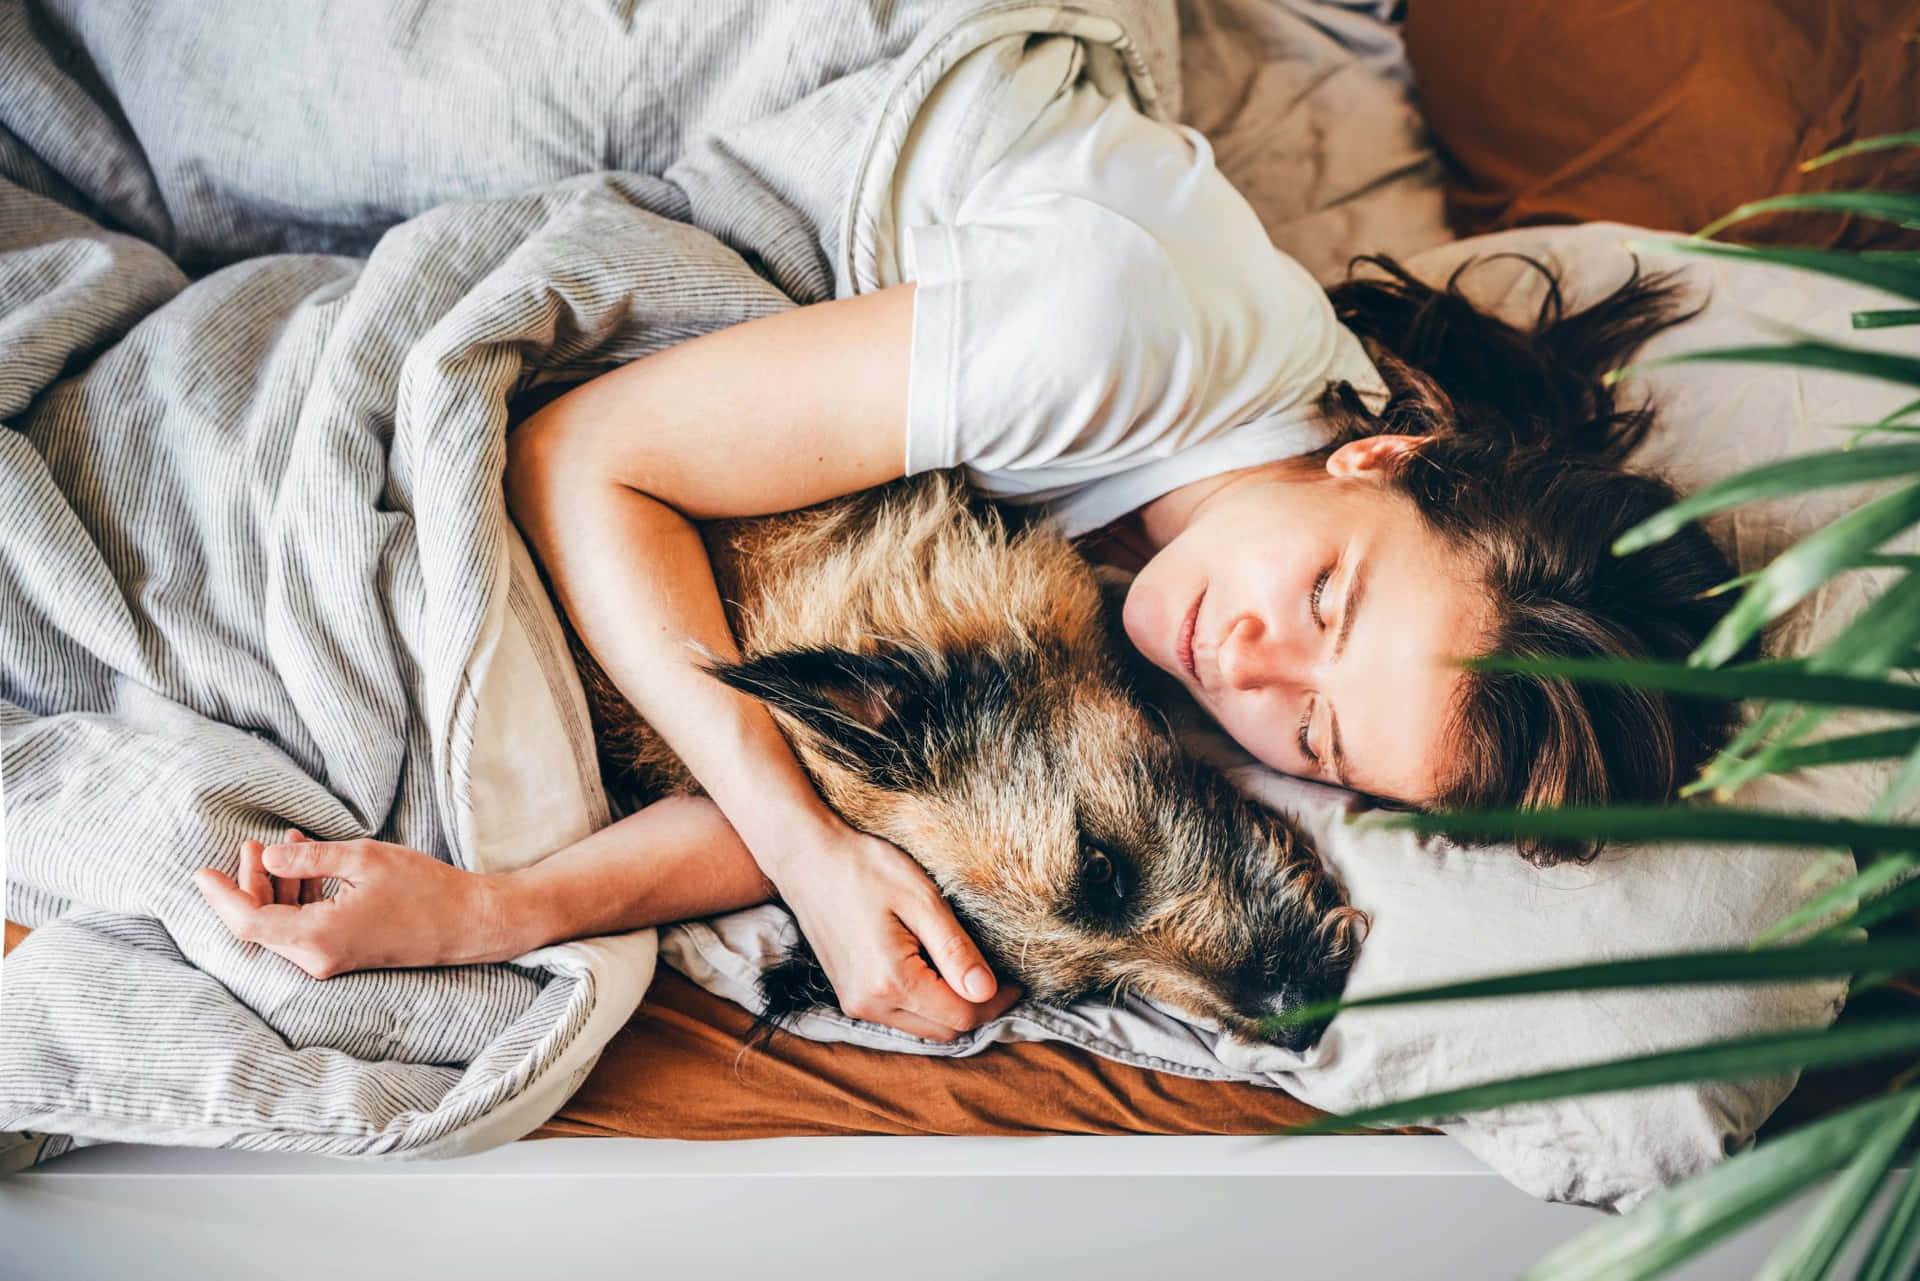 Woman Sleeping With Dog In Bed